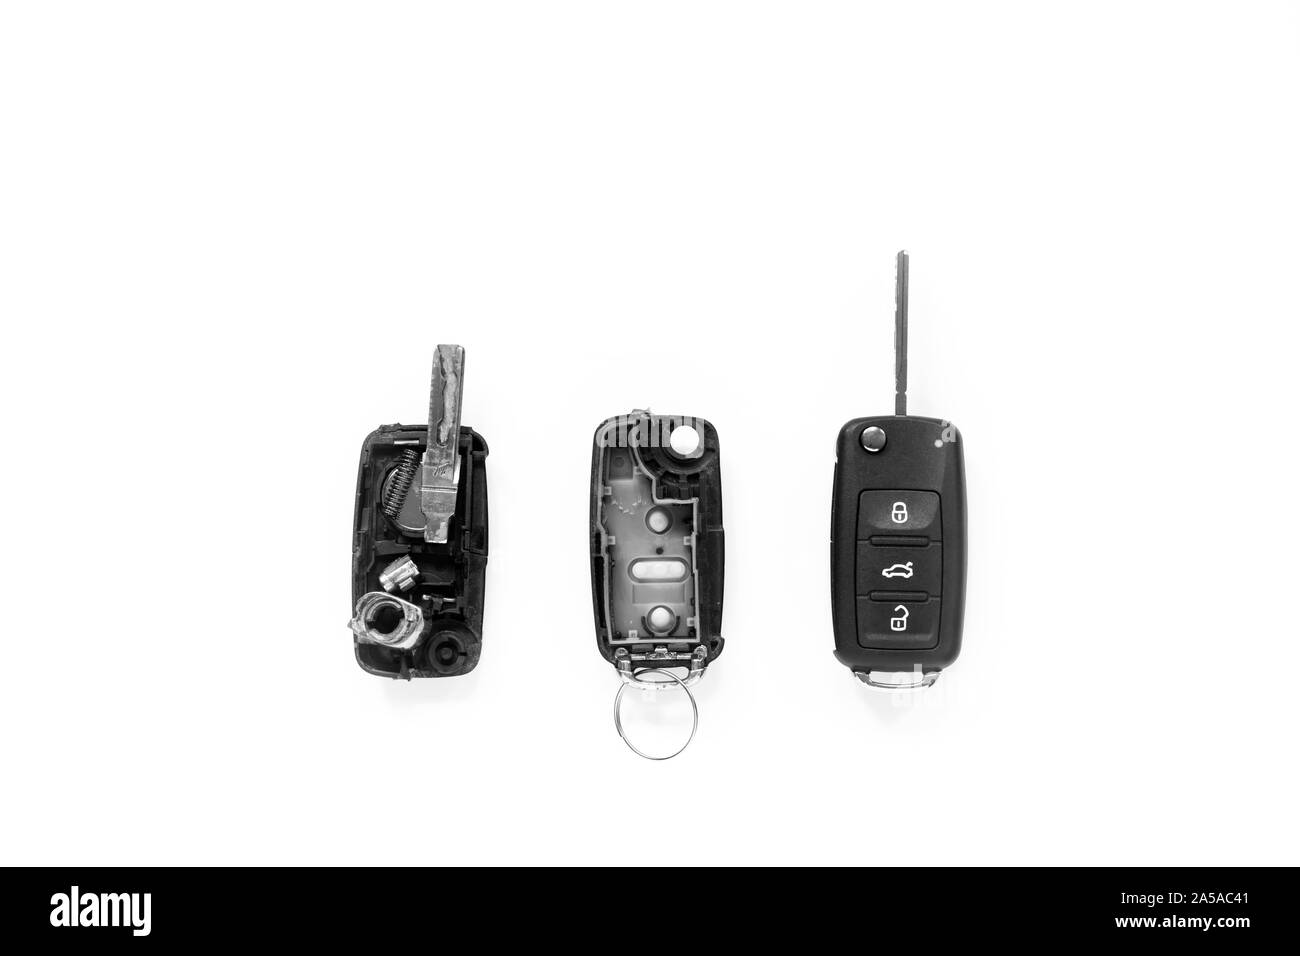 Broken or damaged remote key fob of any vehicle car service center.- Image Stock Photo